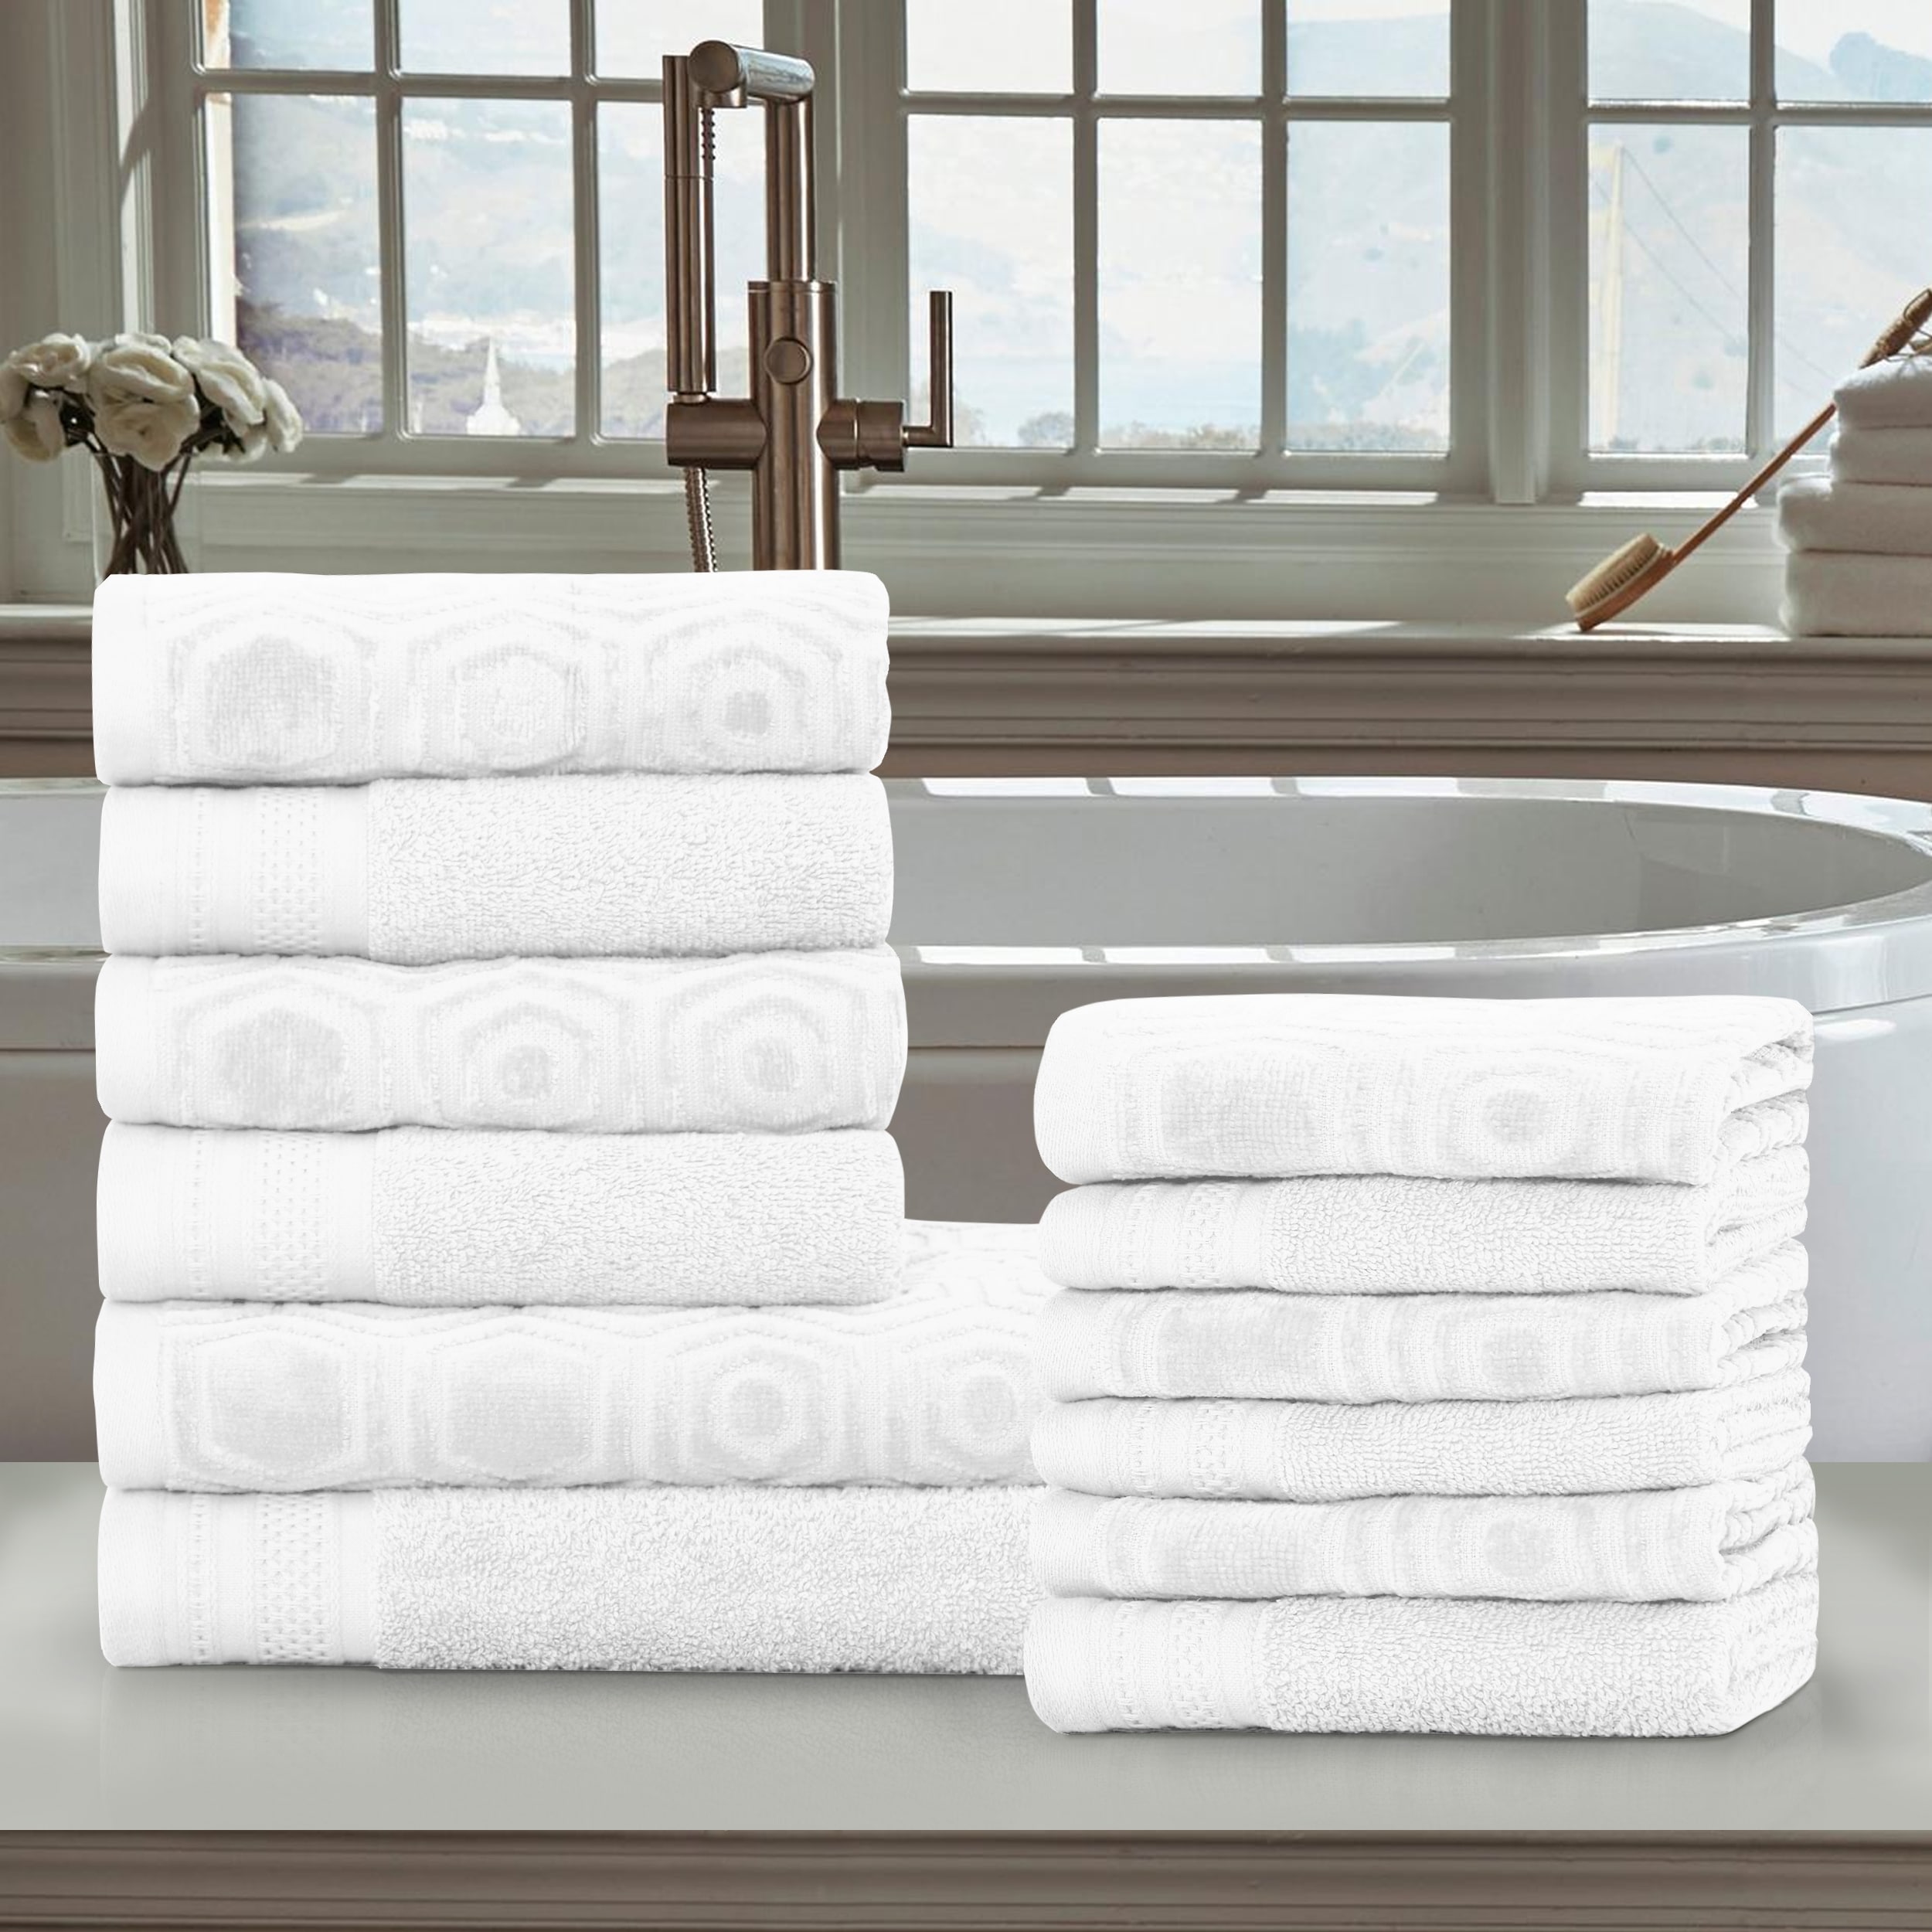 https://ak1.ostkcdn.com/images/products/is/images/direct/a0b554eb72d70e872a559bbfc2adc9cd8df8d5c3/Combed-Cotton-Highly-Absorbent-12-Piece-Towel-Set-by-Miranda-Haus.jpg